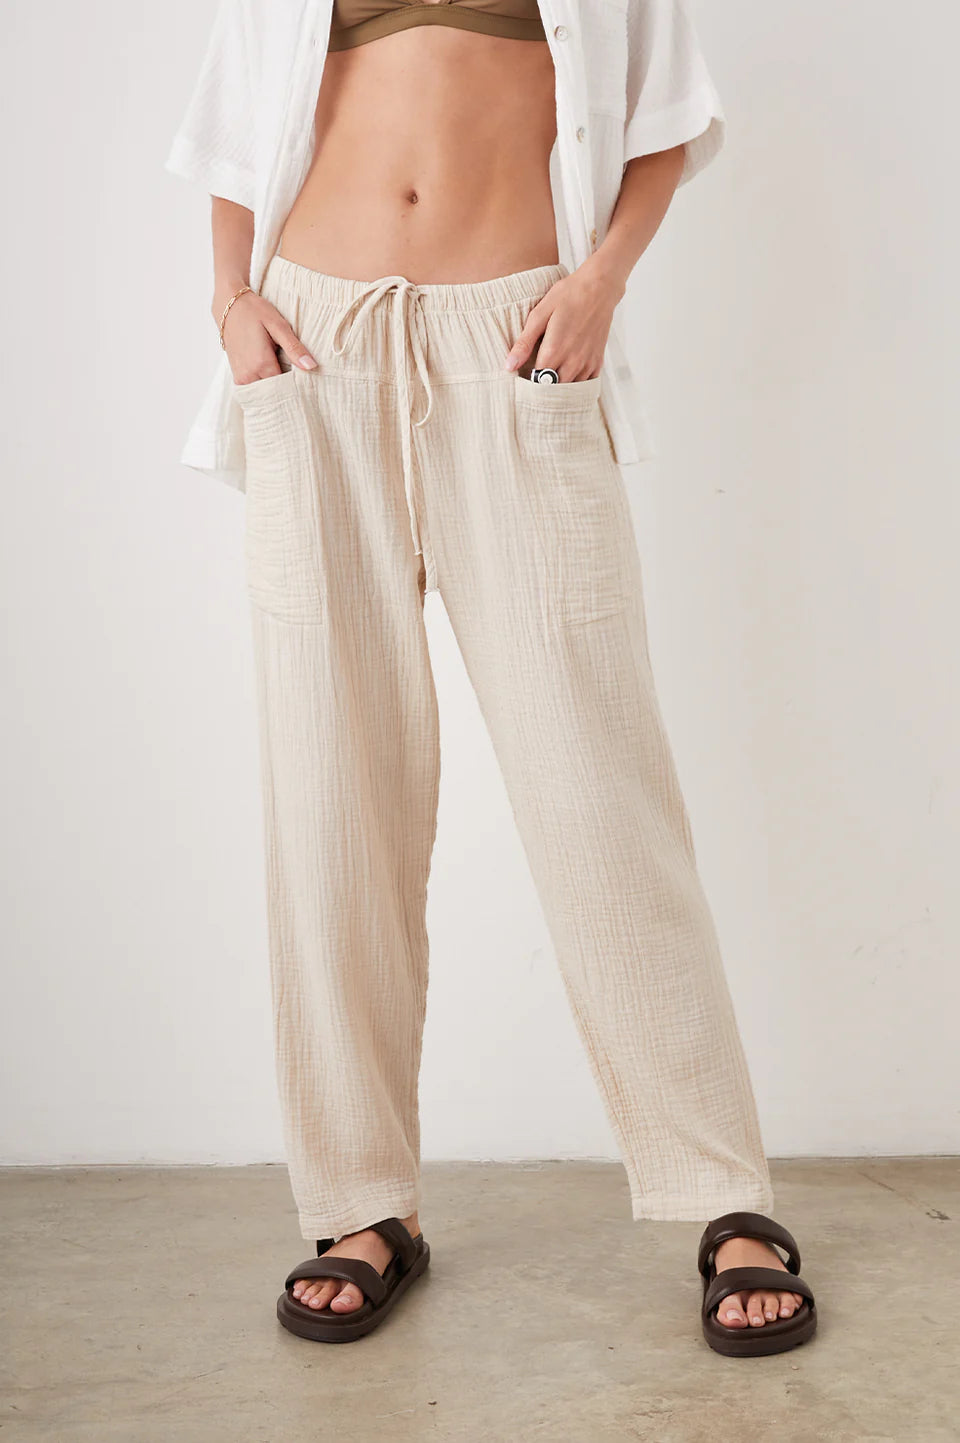 Darby Cotton Pants